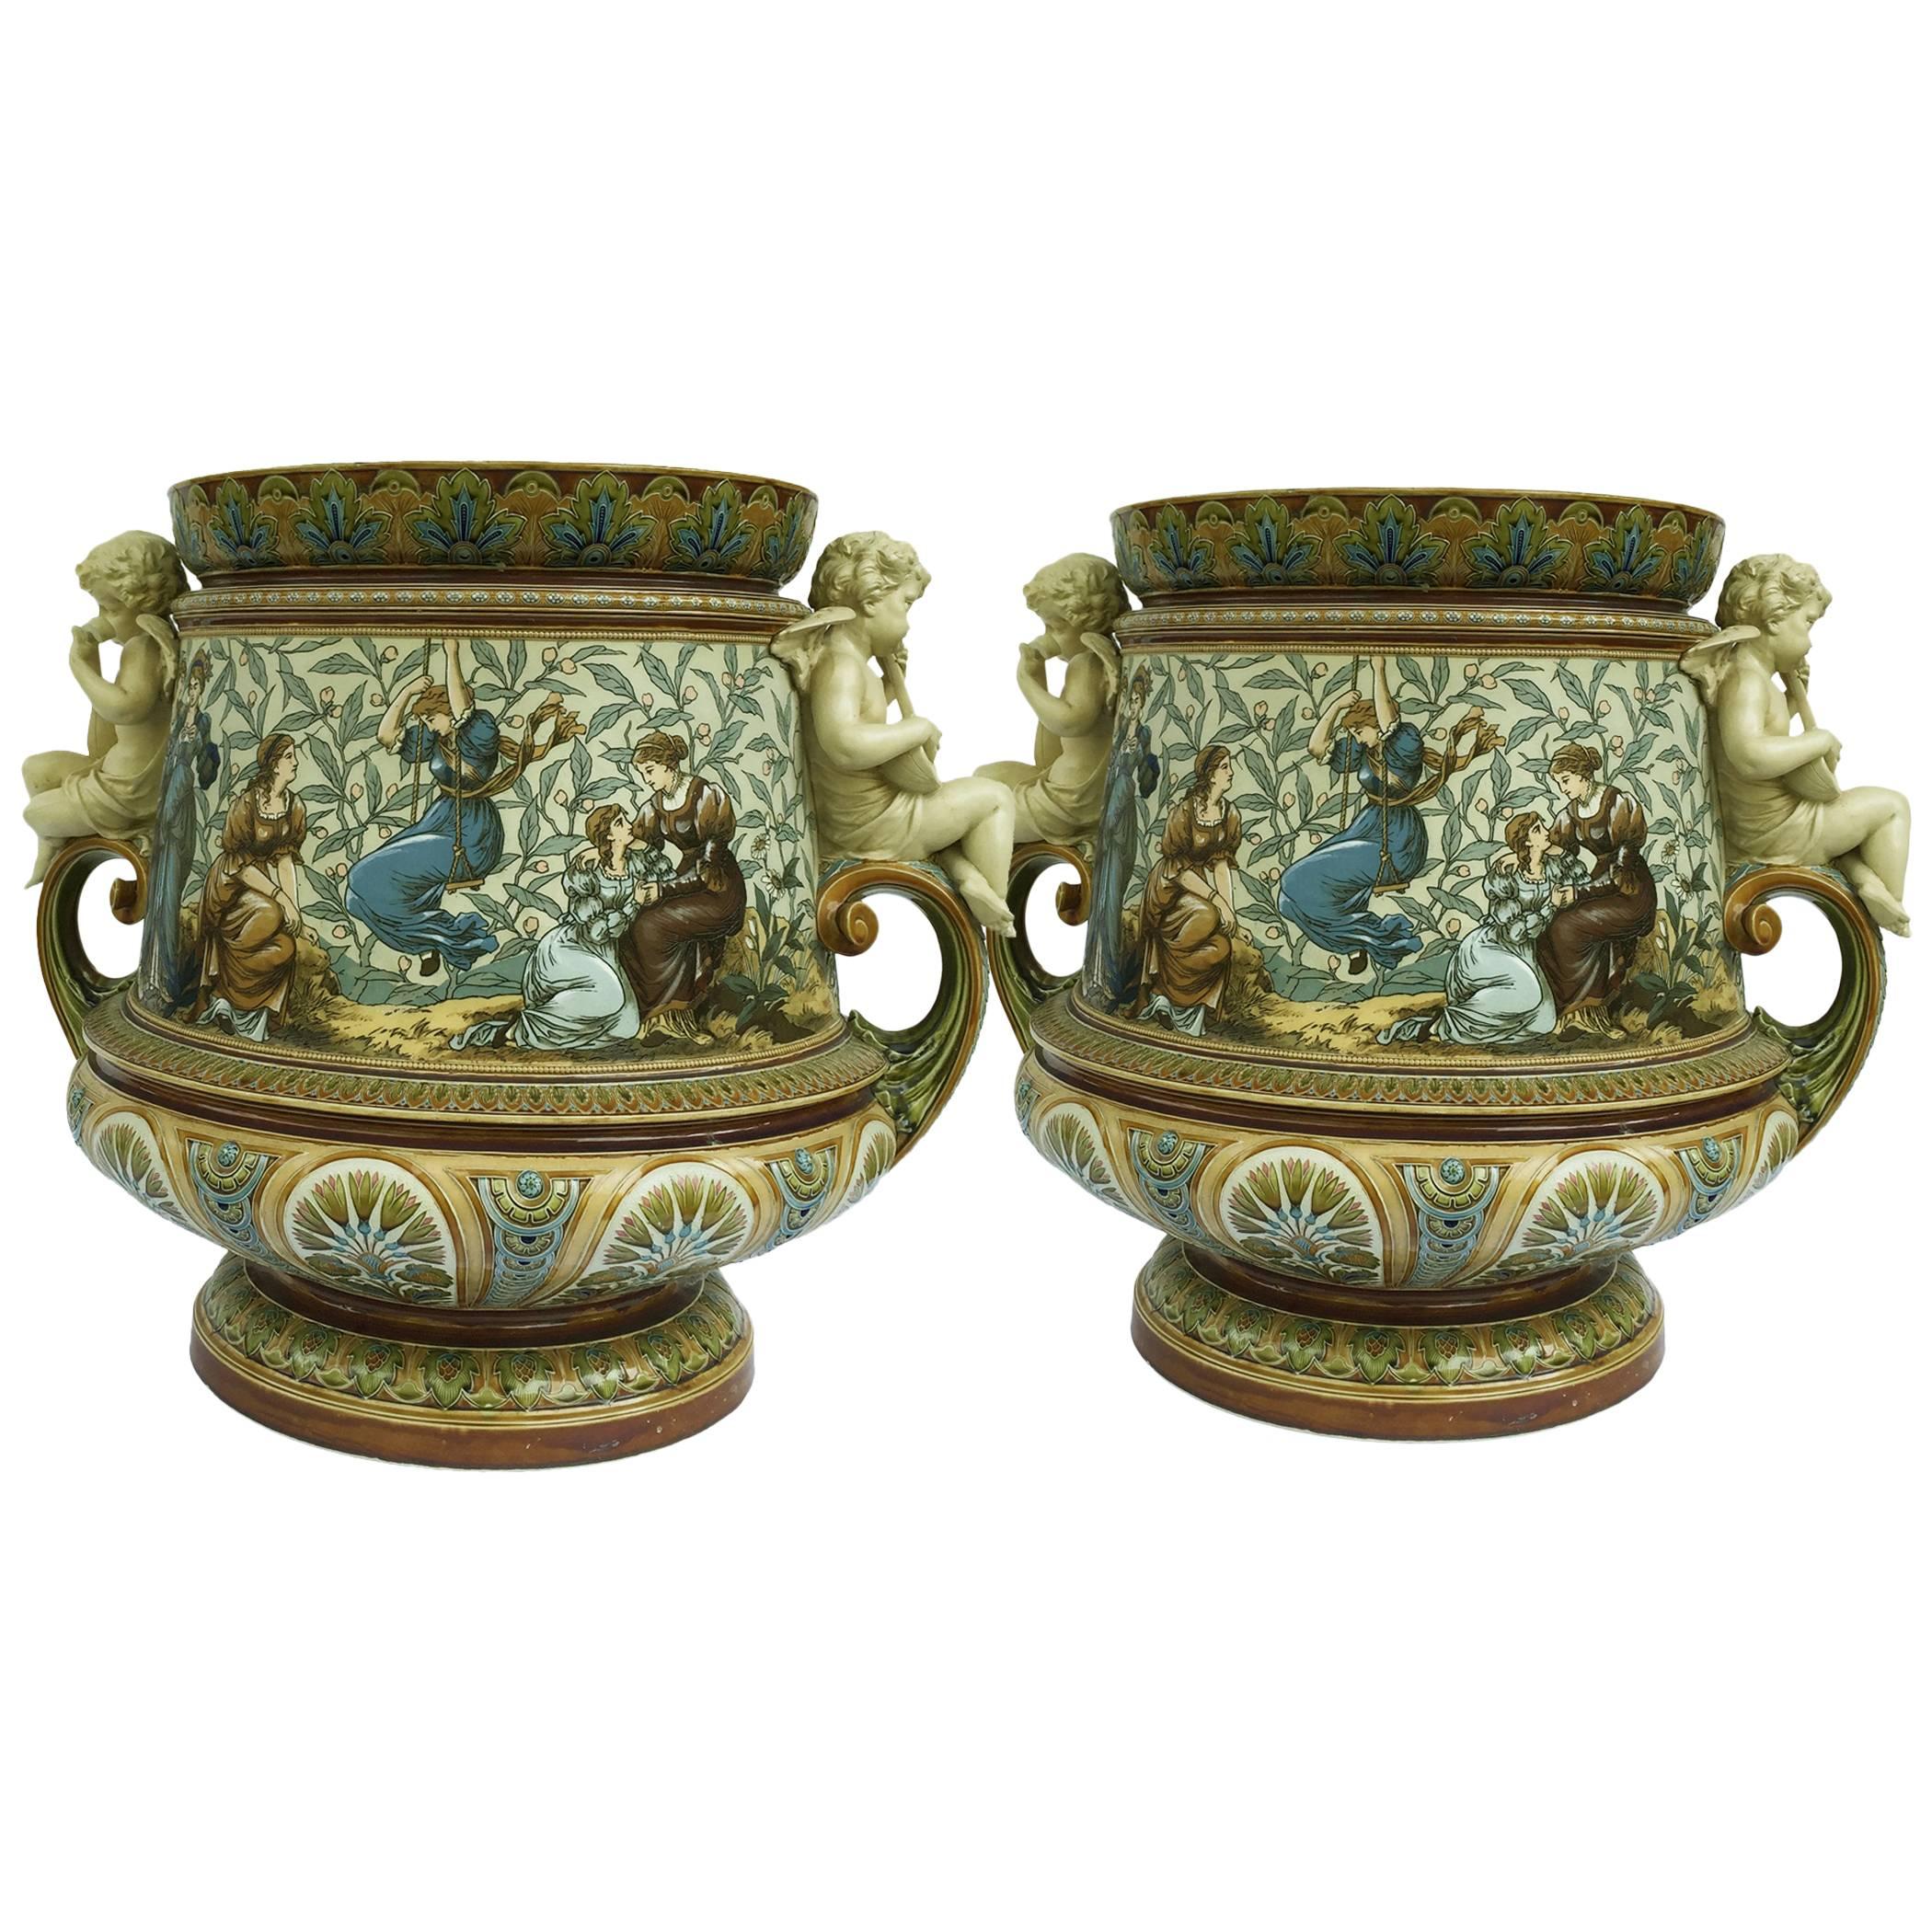 Villeroy & Boch Pair of Monumental Jardinières Painted by Warth, Dated 1888